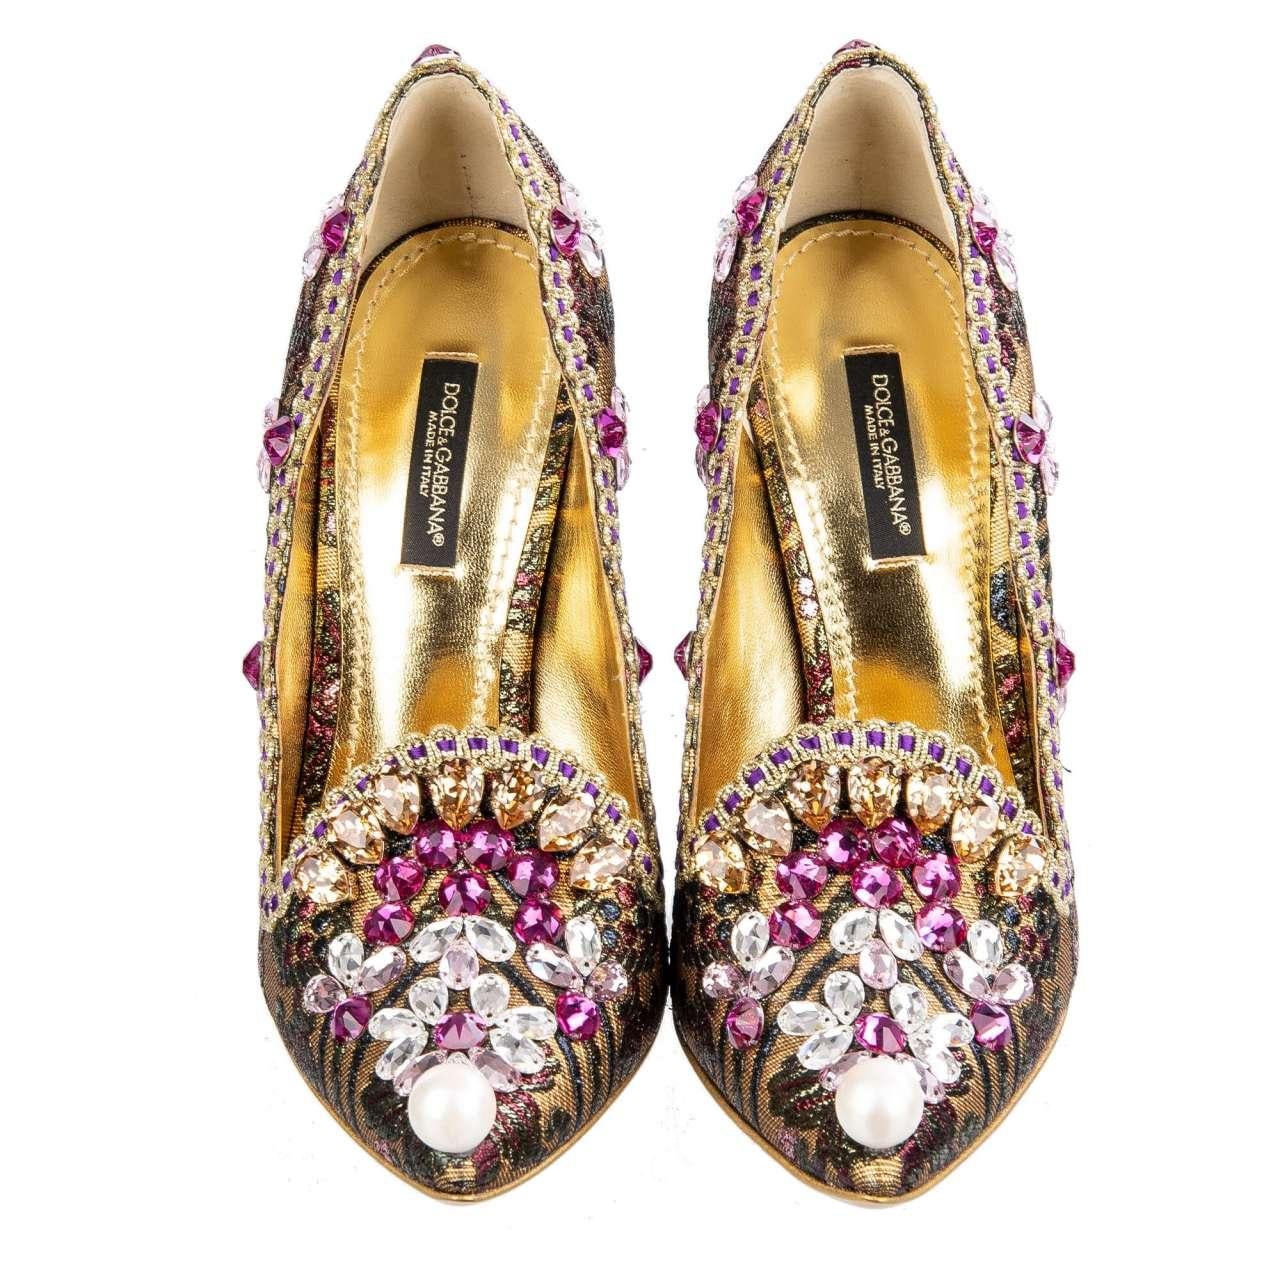 Dolce & Gabbana Lurex Jacquard Crystals Embroidered Pumps ALADINO Gold EUR 37 For Sale 1